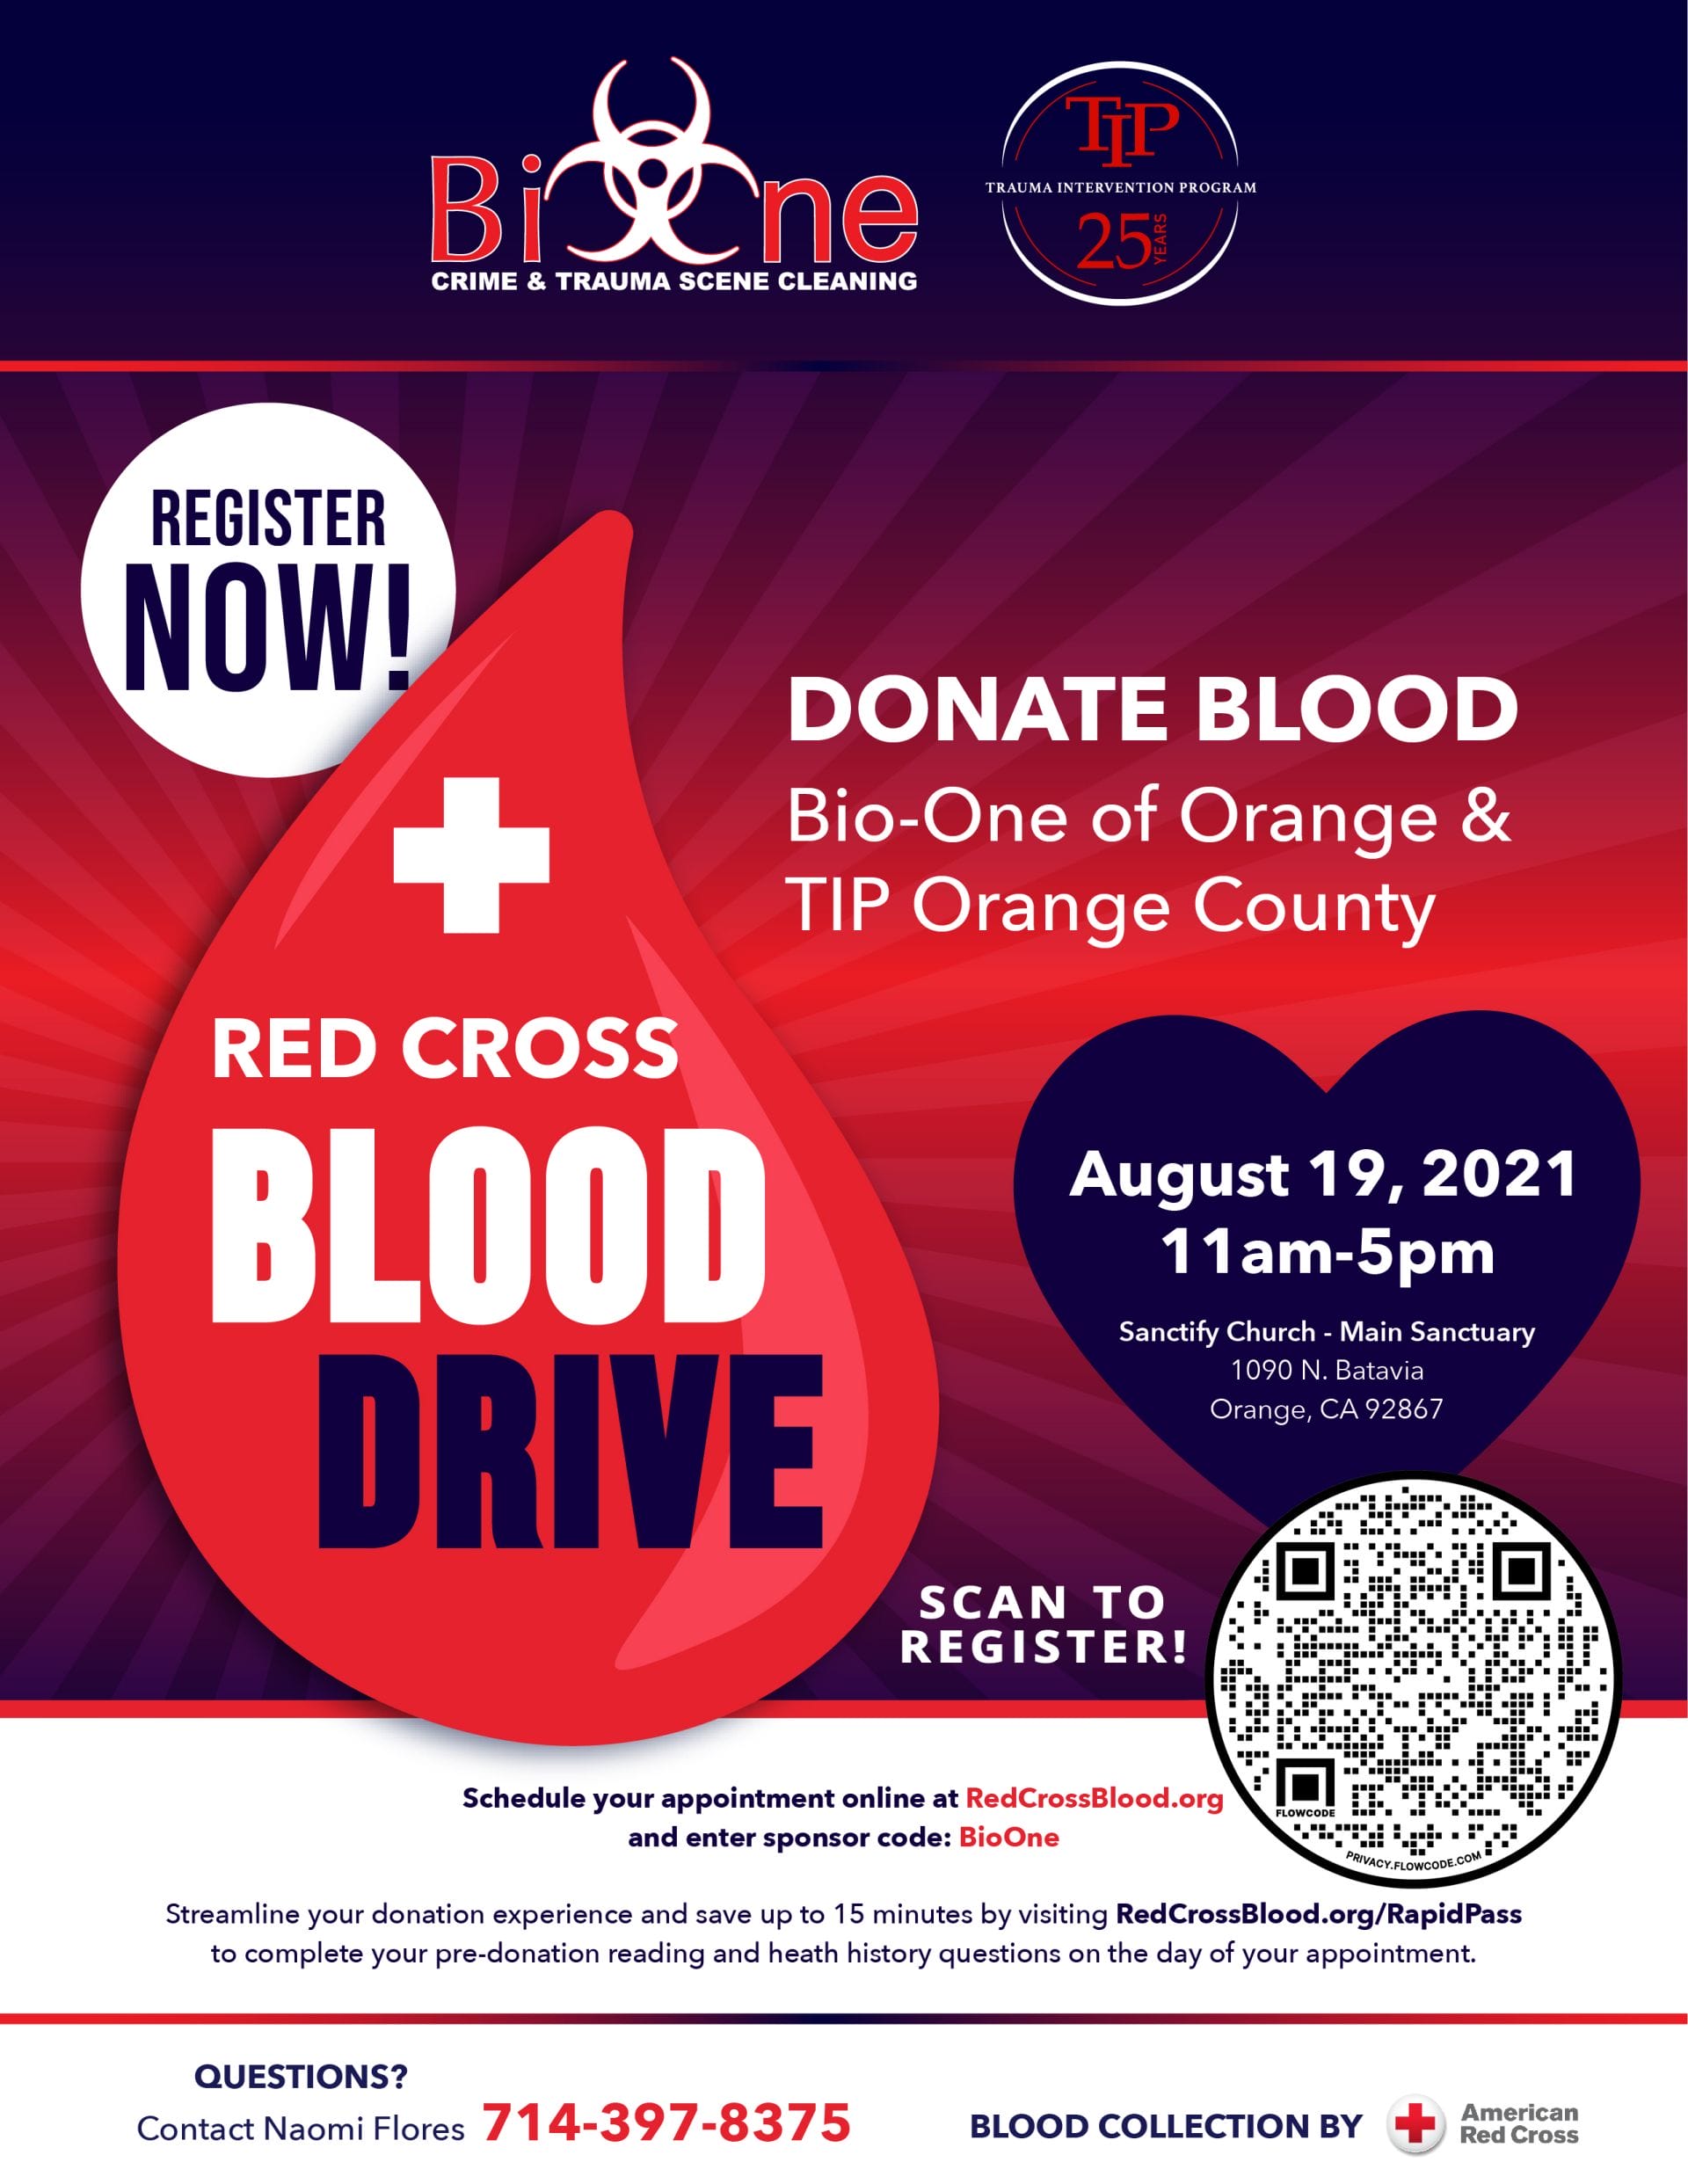 Blood Drive - On August 19, 2021 at Sanctify Church from 11am-5pm